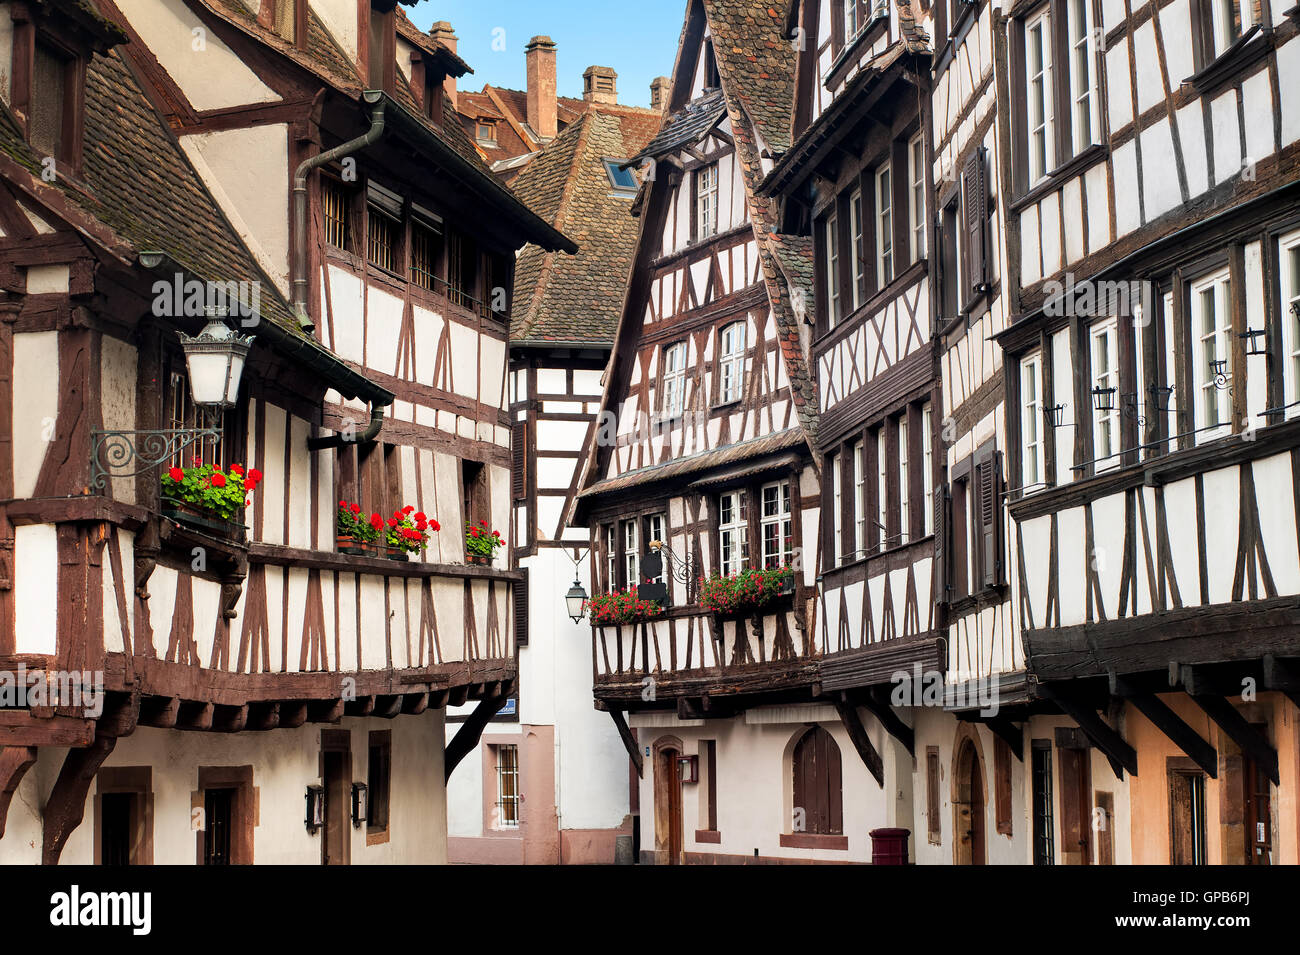 Traditional half-timbered houses in the old town of Strasbourg, Alsace, France Stock Photo